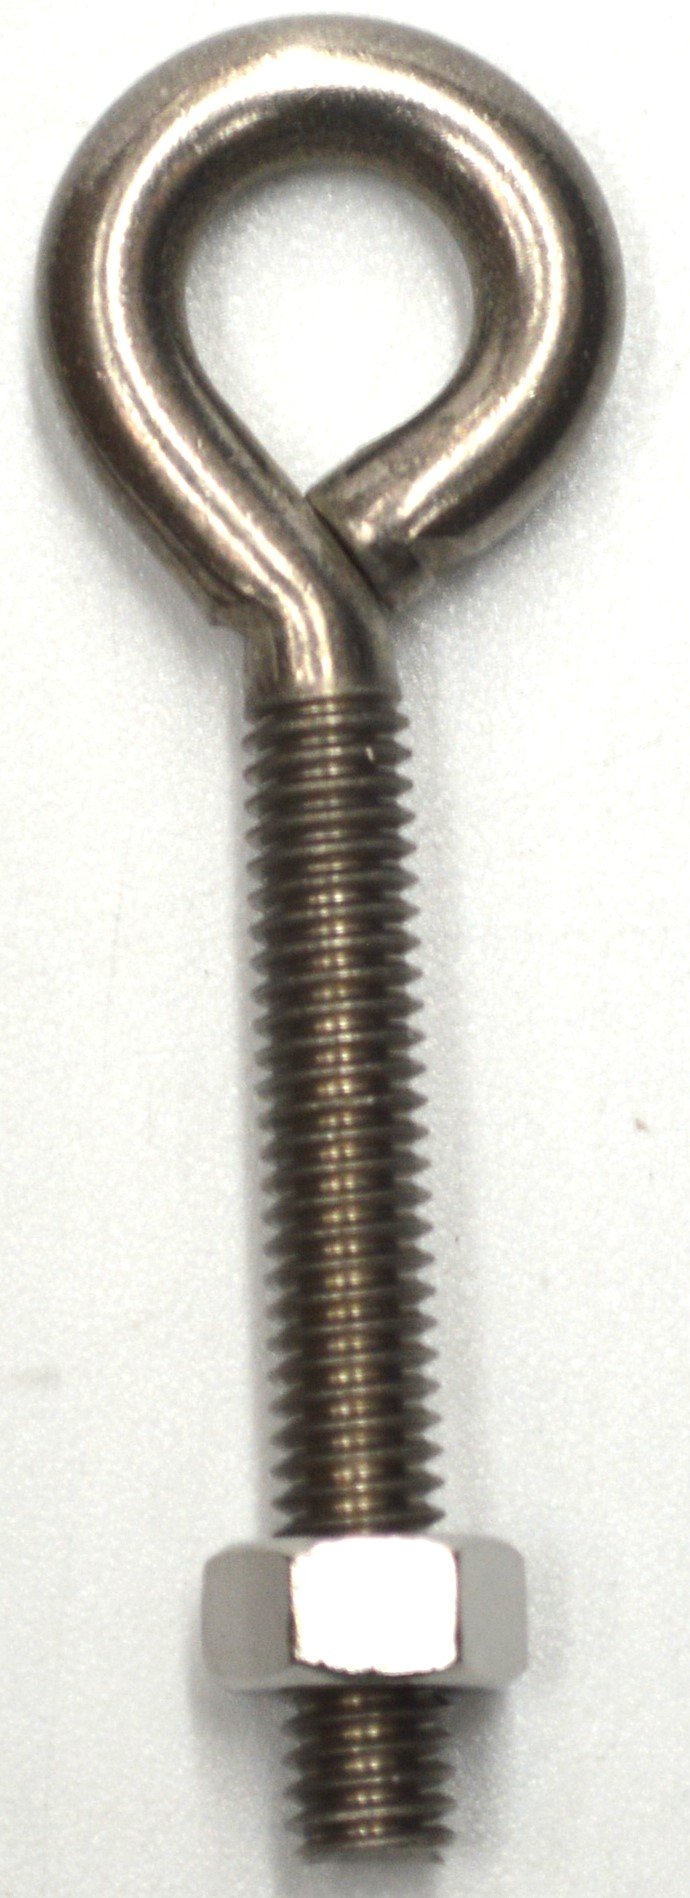 Eye Bolt & Nut - Stainless Steel #5SS 3-1/4 x 5/16 inch Hindley